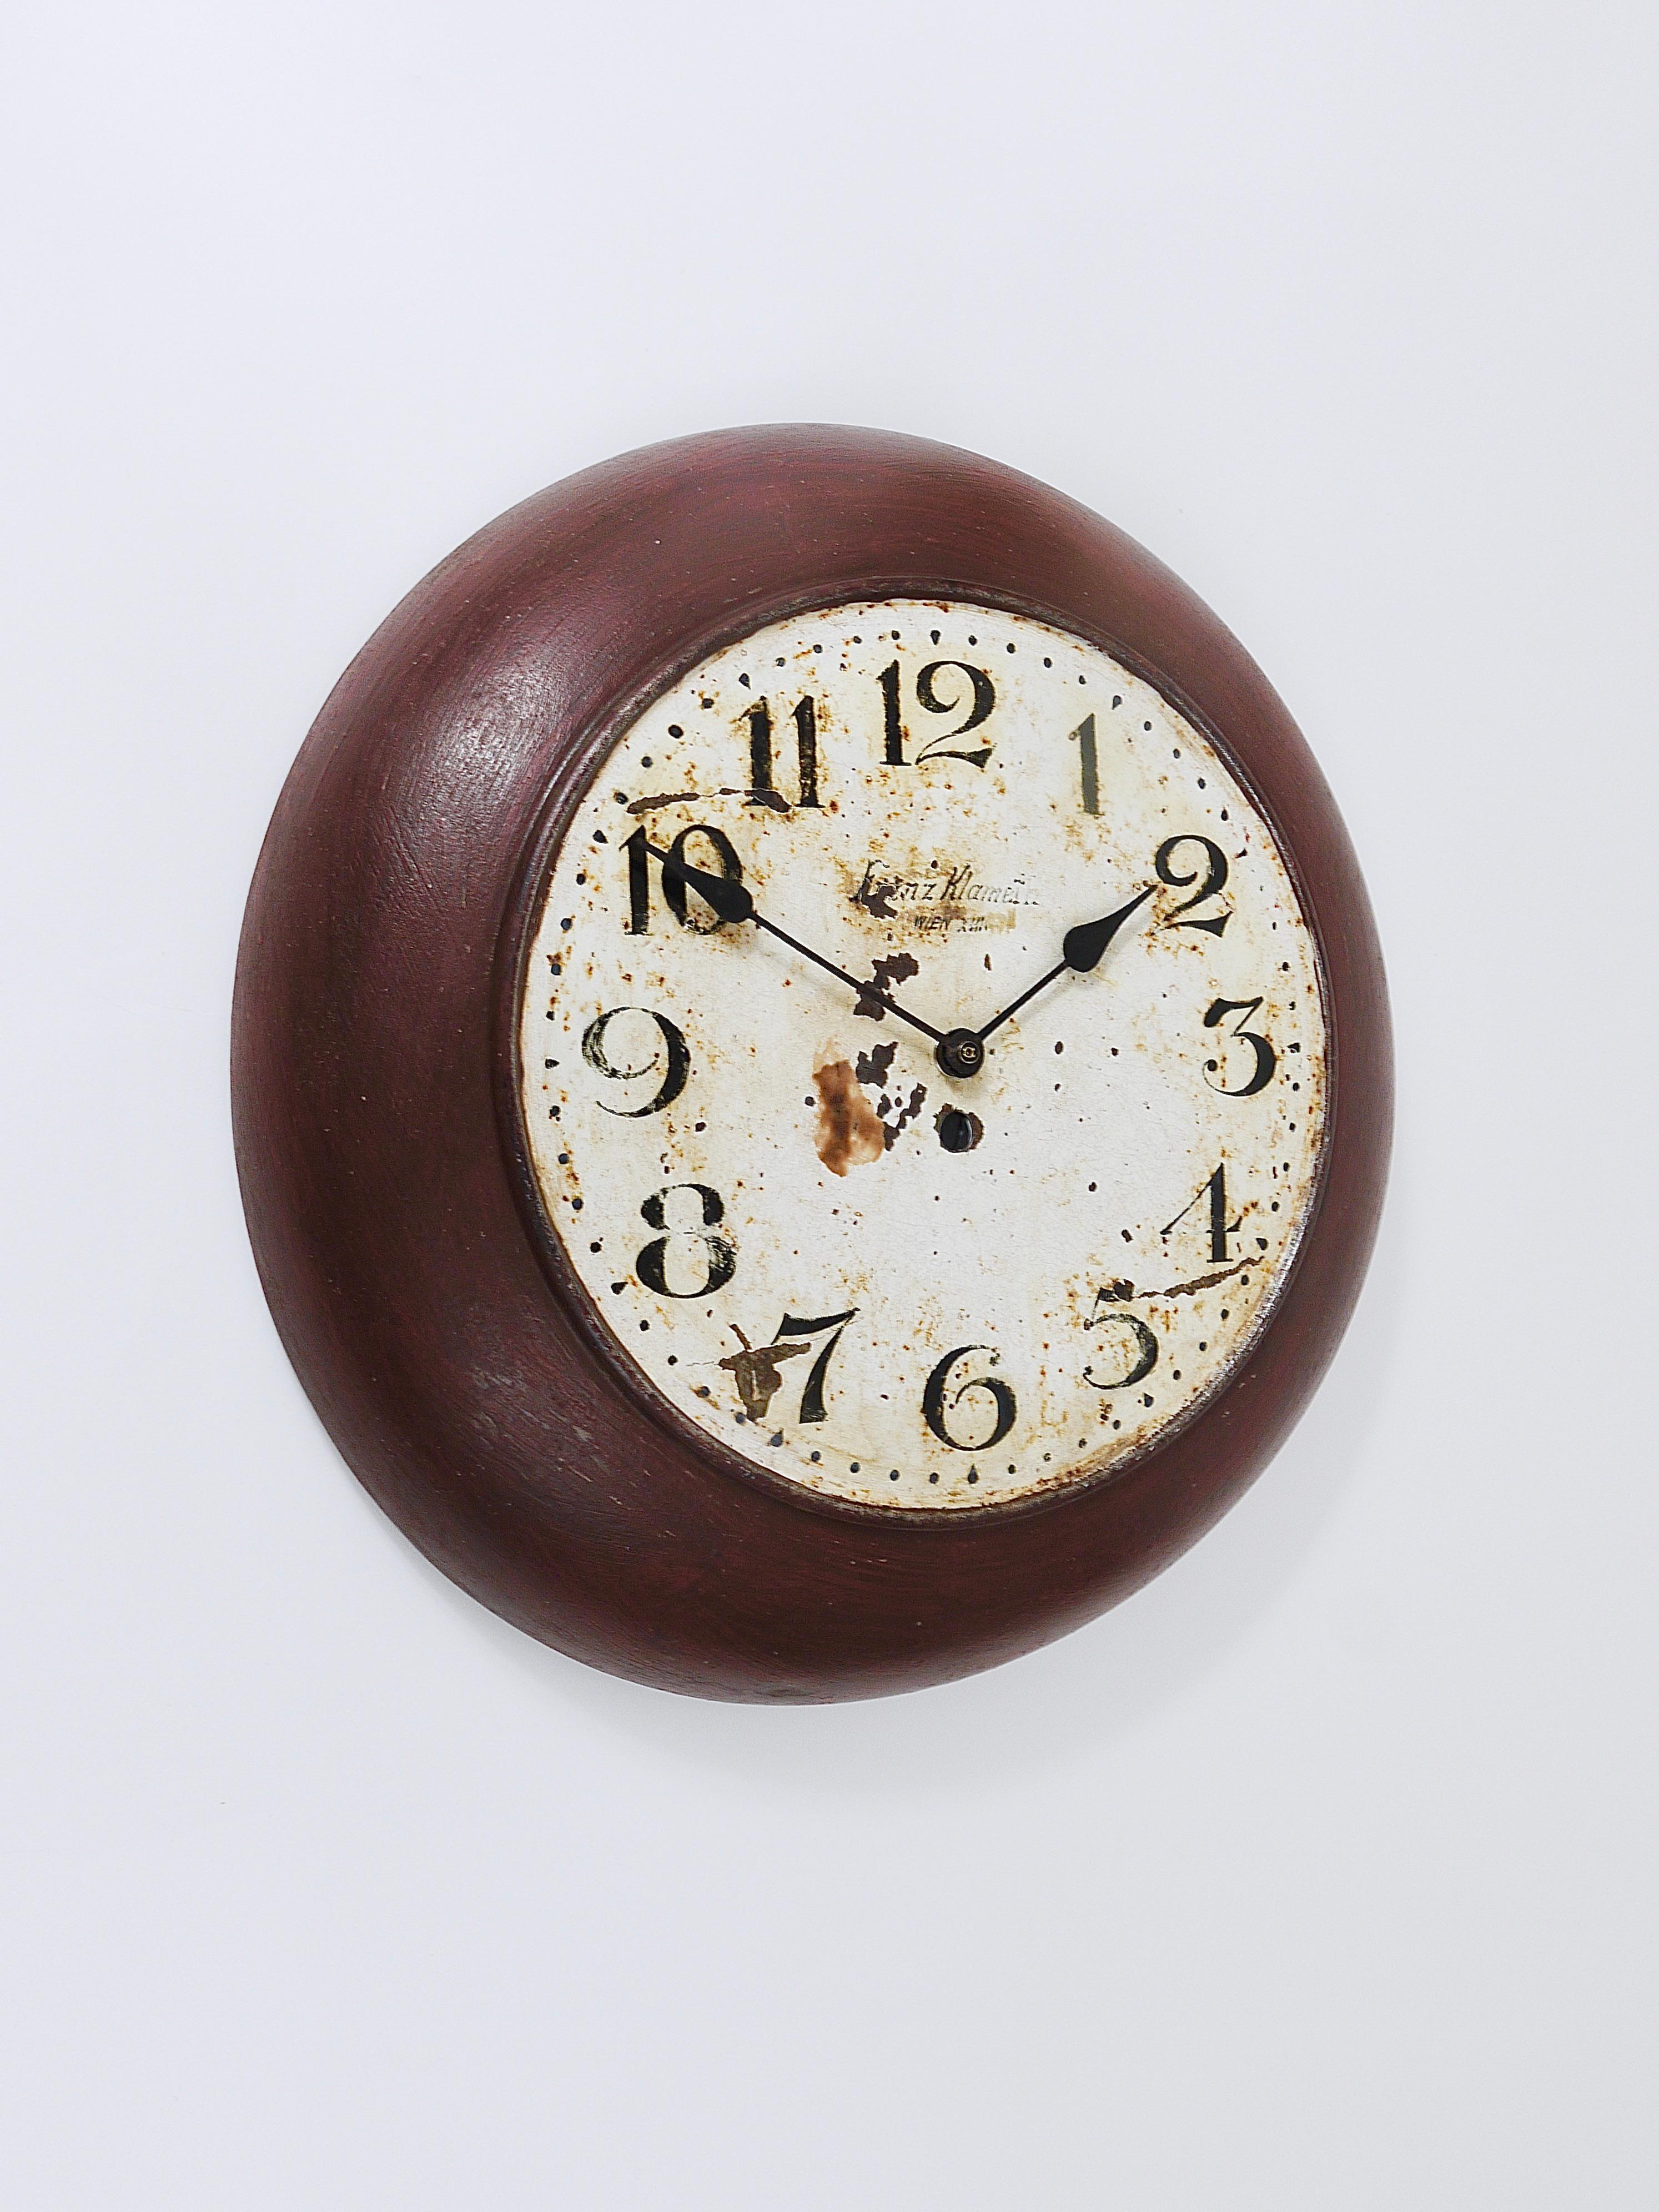 Early 20th Century Antique 1920s Public Iron Wall Clock With Hand-Painted Dial, Industrial Style For Sale